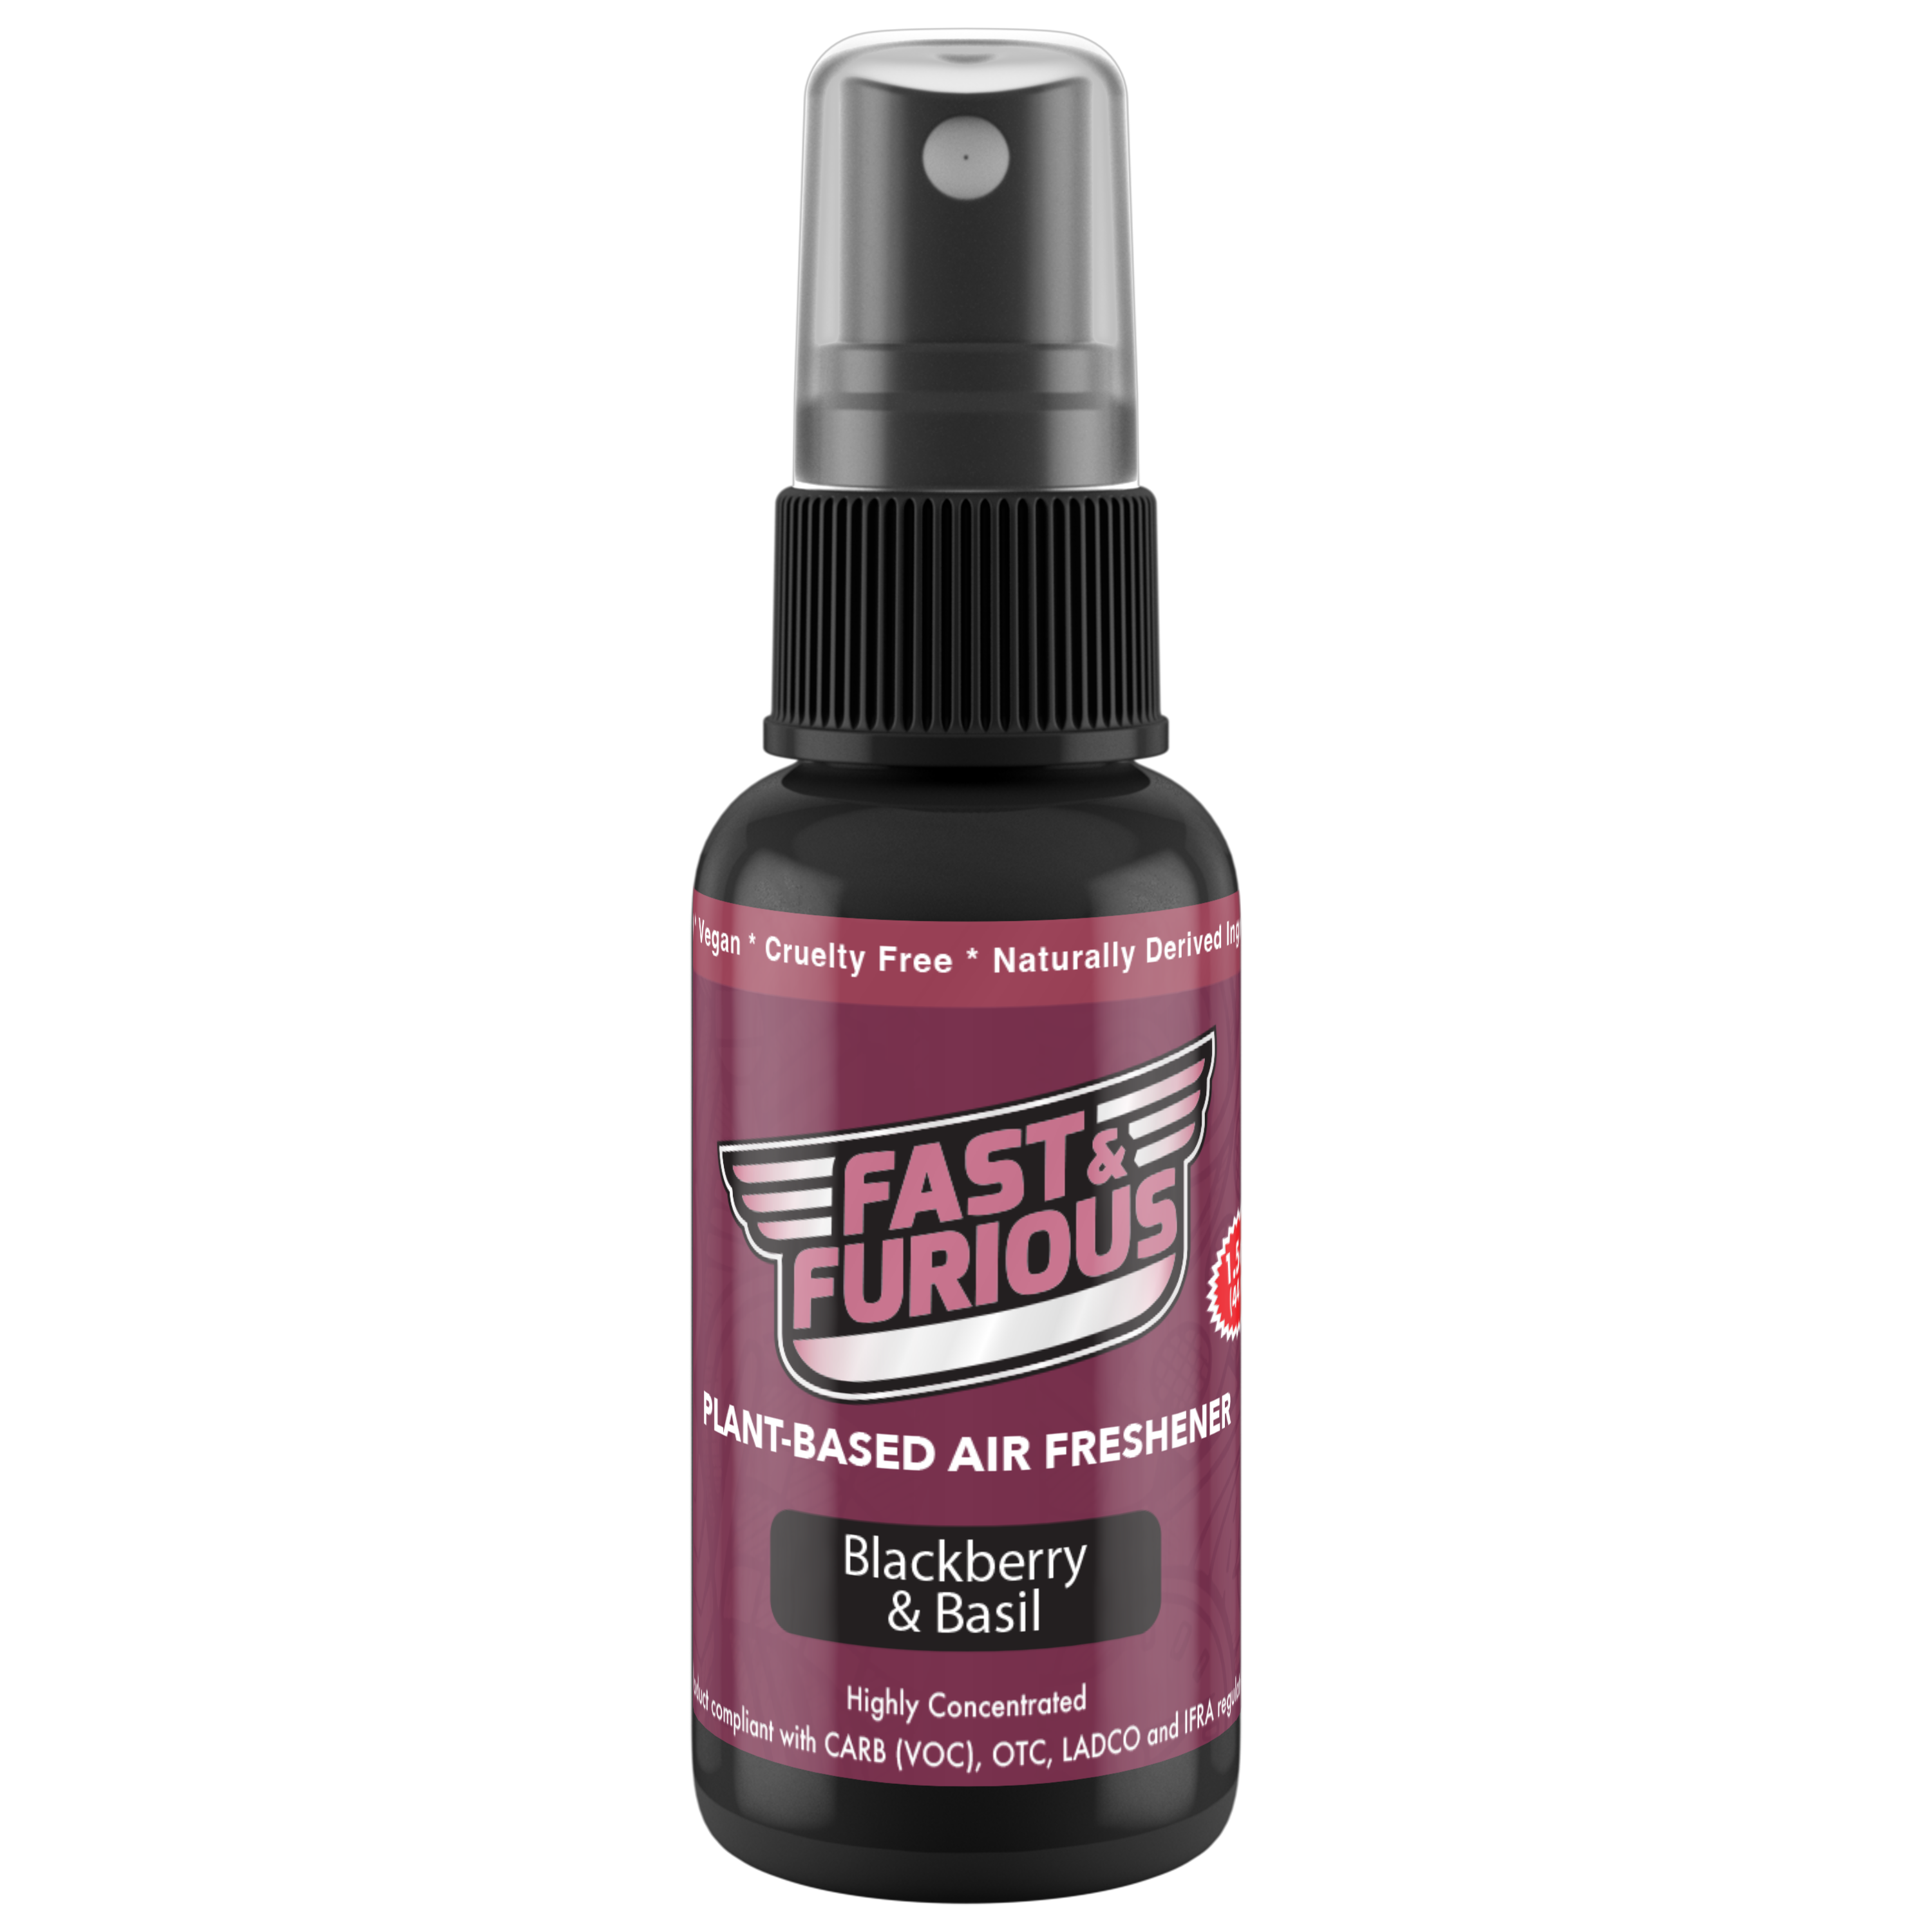 Fast and Furious Plant-Based Air Freshener - Blackberry & Basil Scent